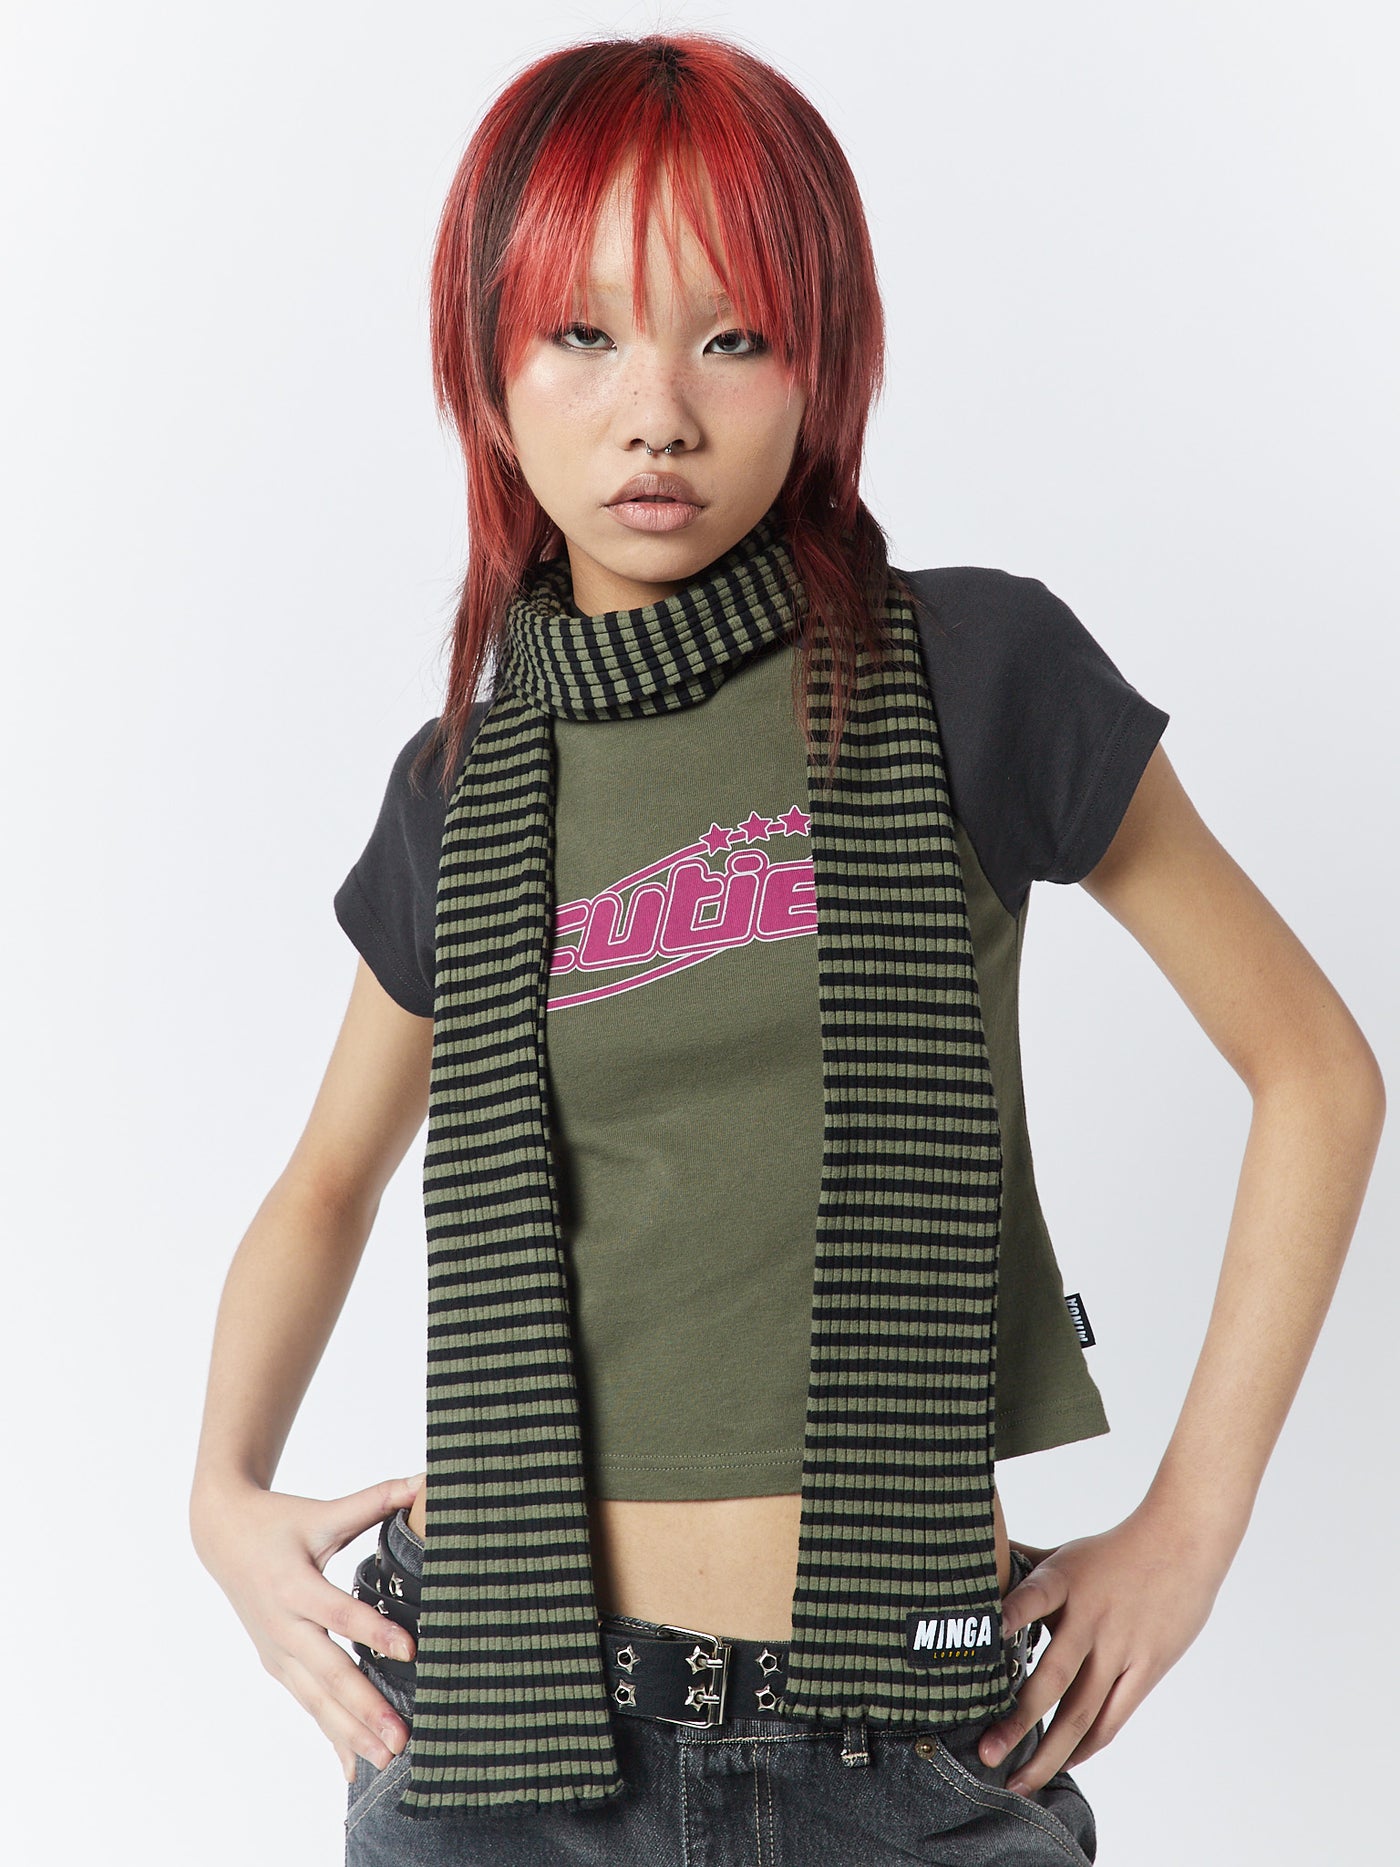 A green and black striped scarf by Minga London. This girlfriend-style scarf adds a trendy and stylish touch to any outfit with its bold stripes and versatile color combination.